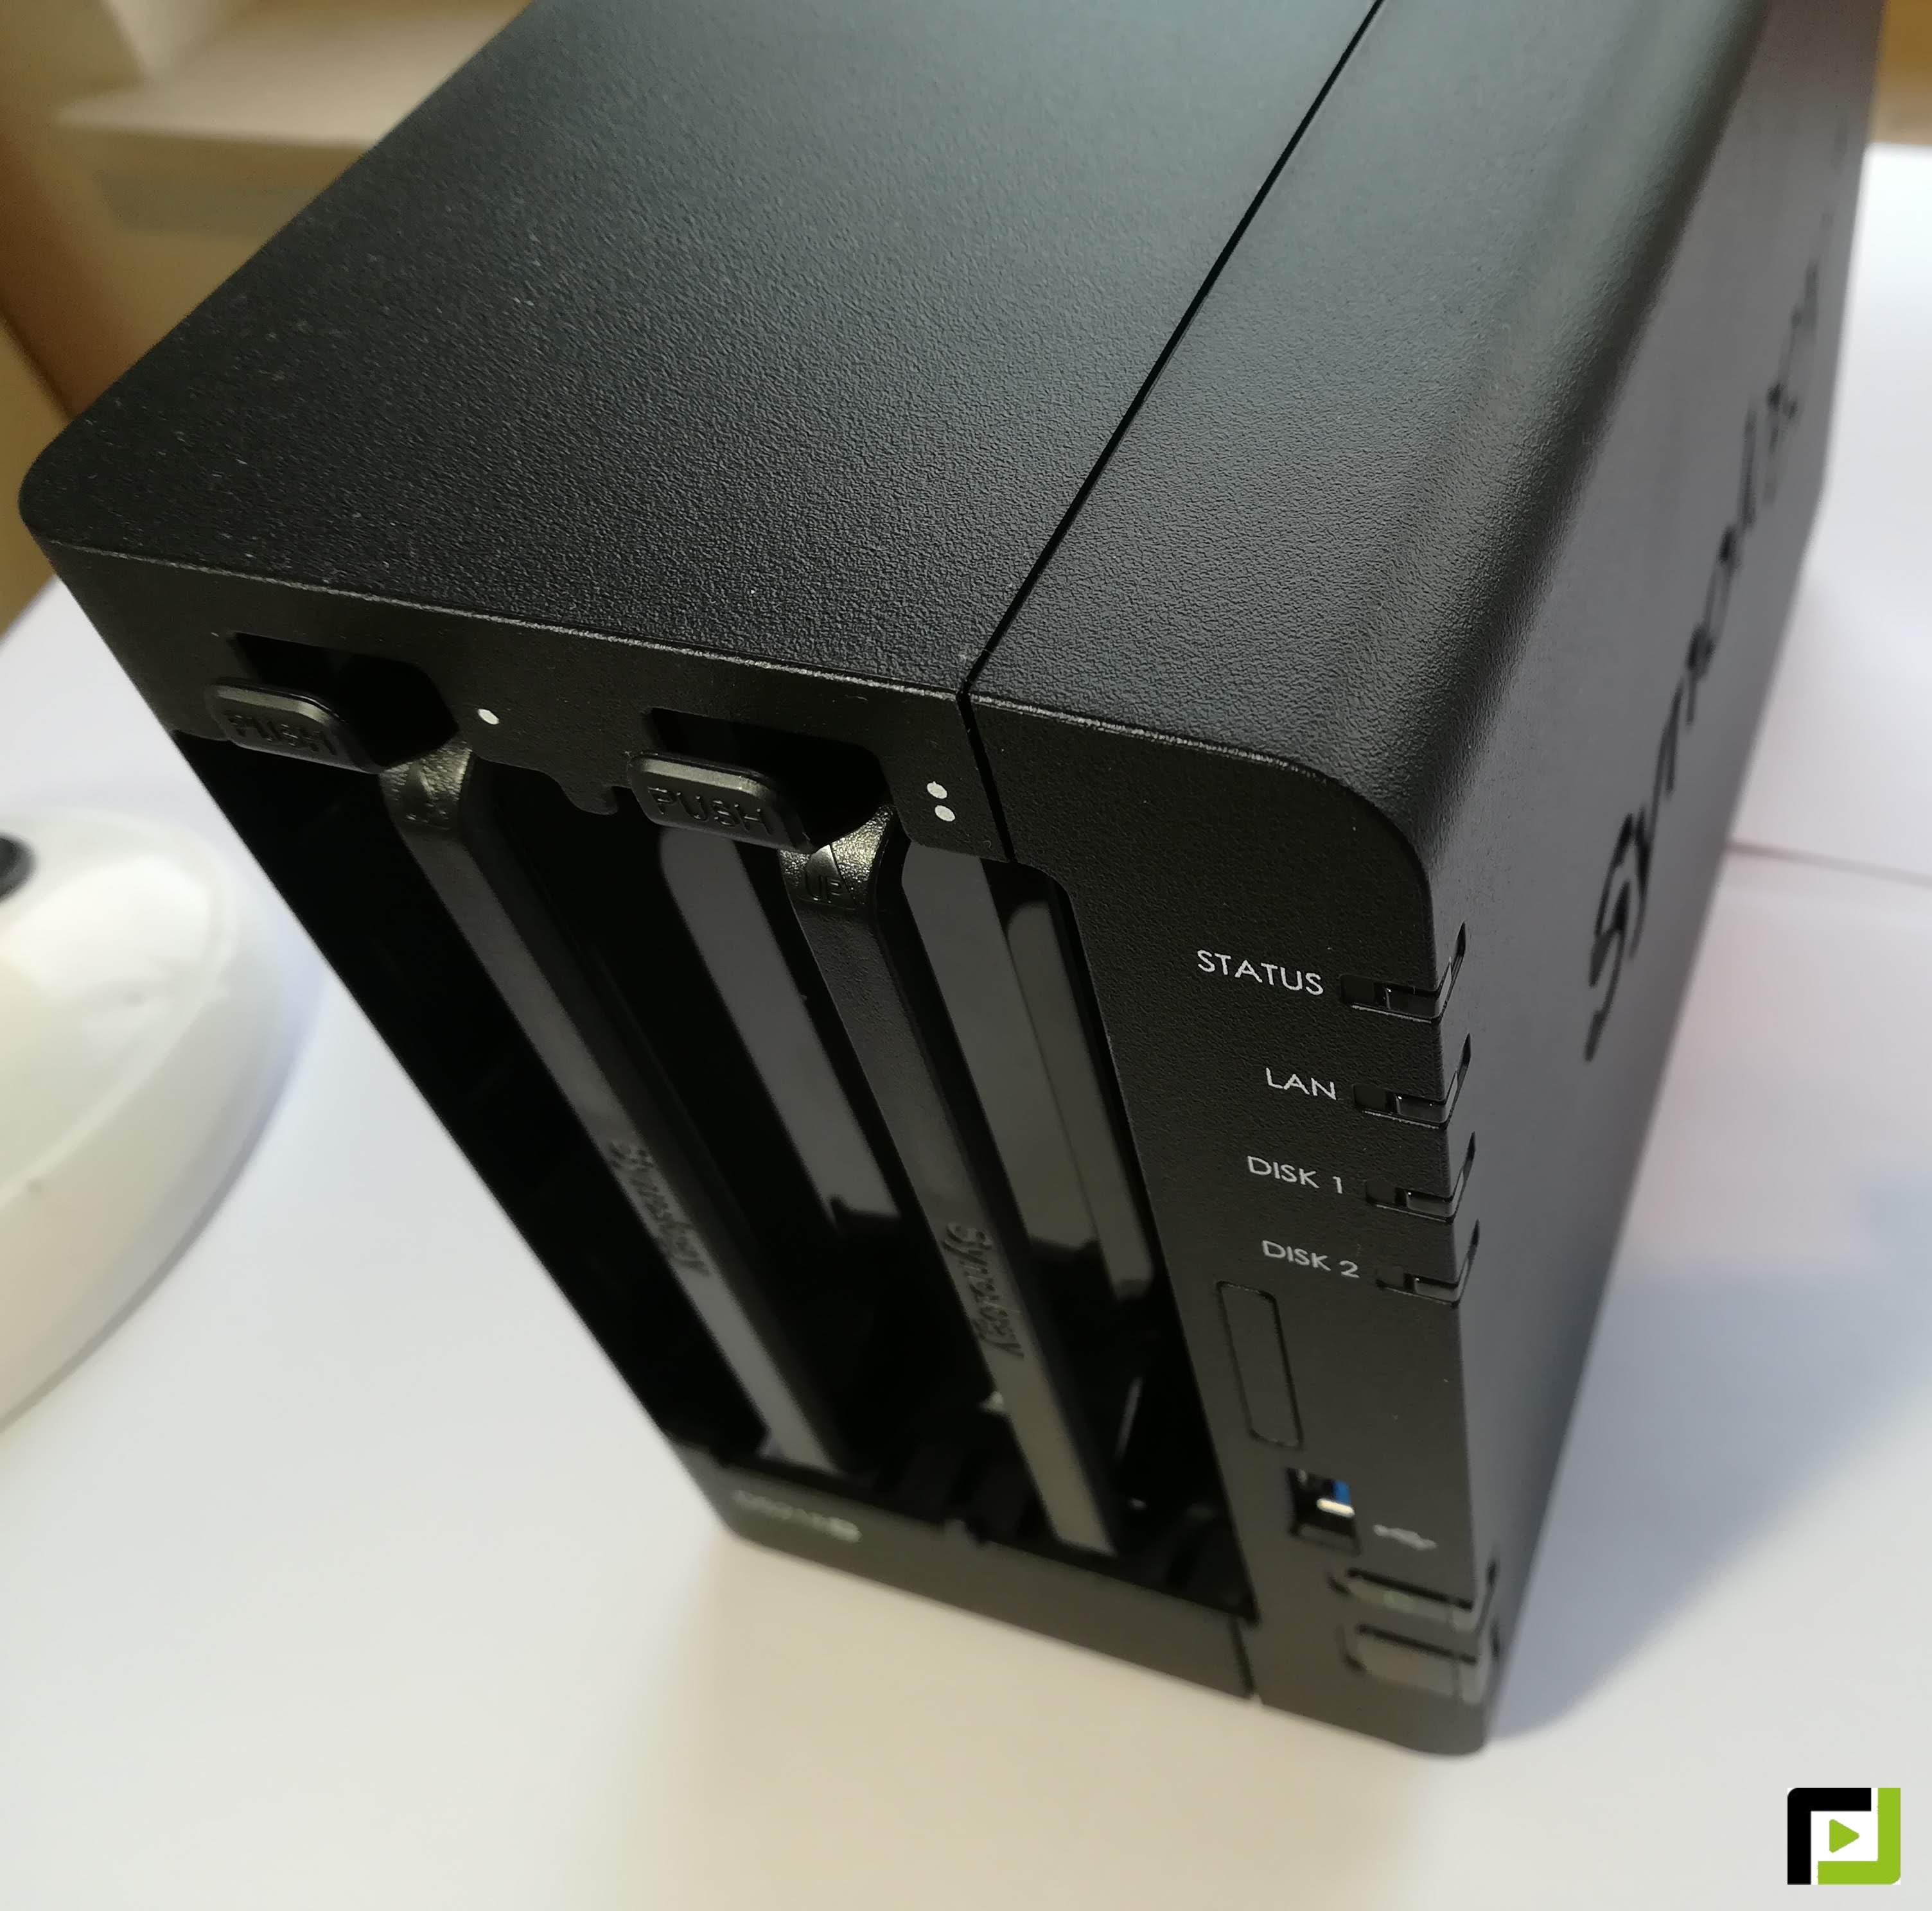 synology hidrive backup review